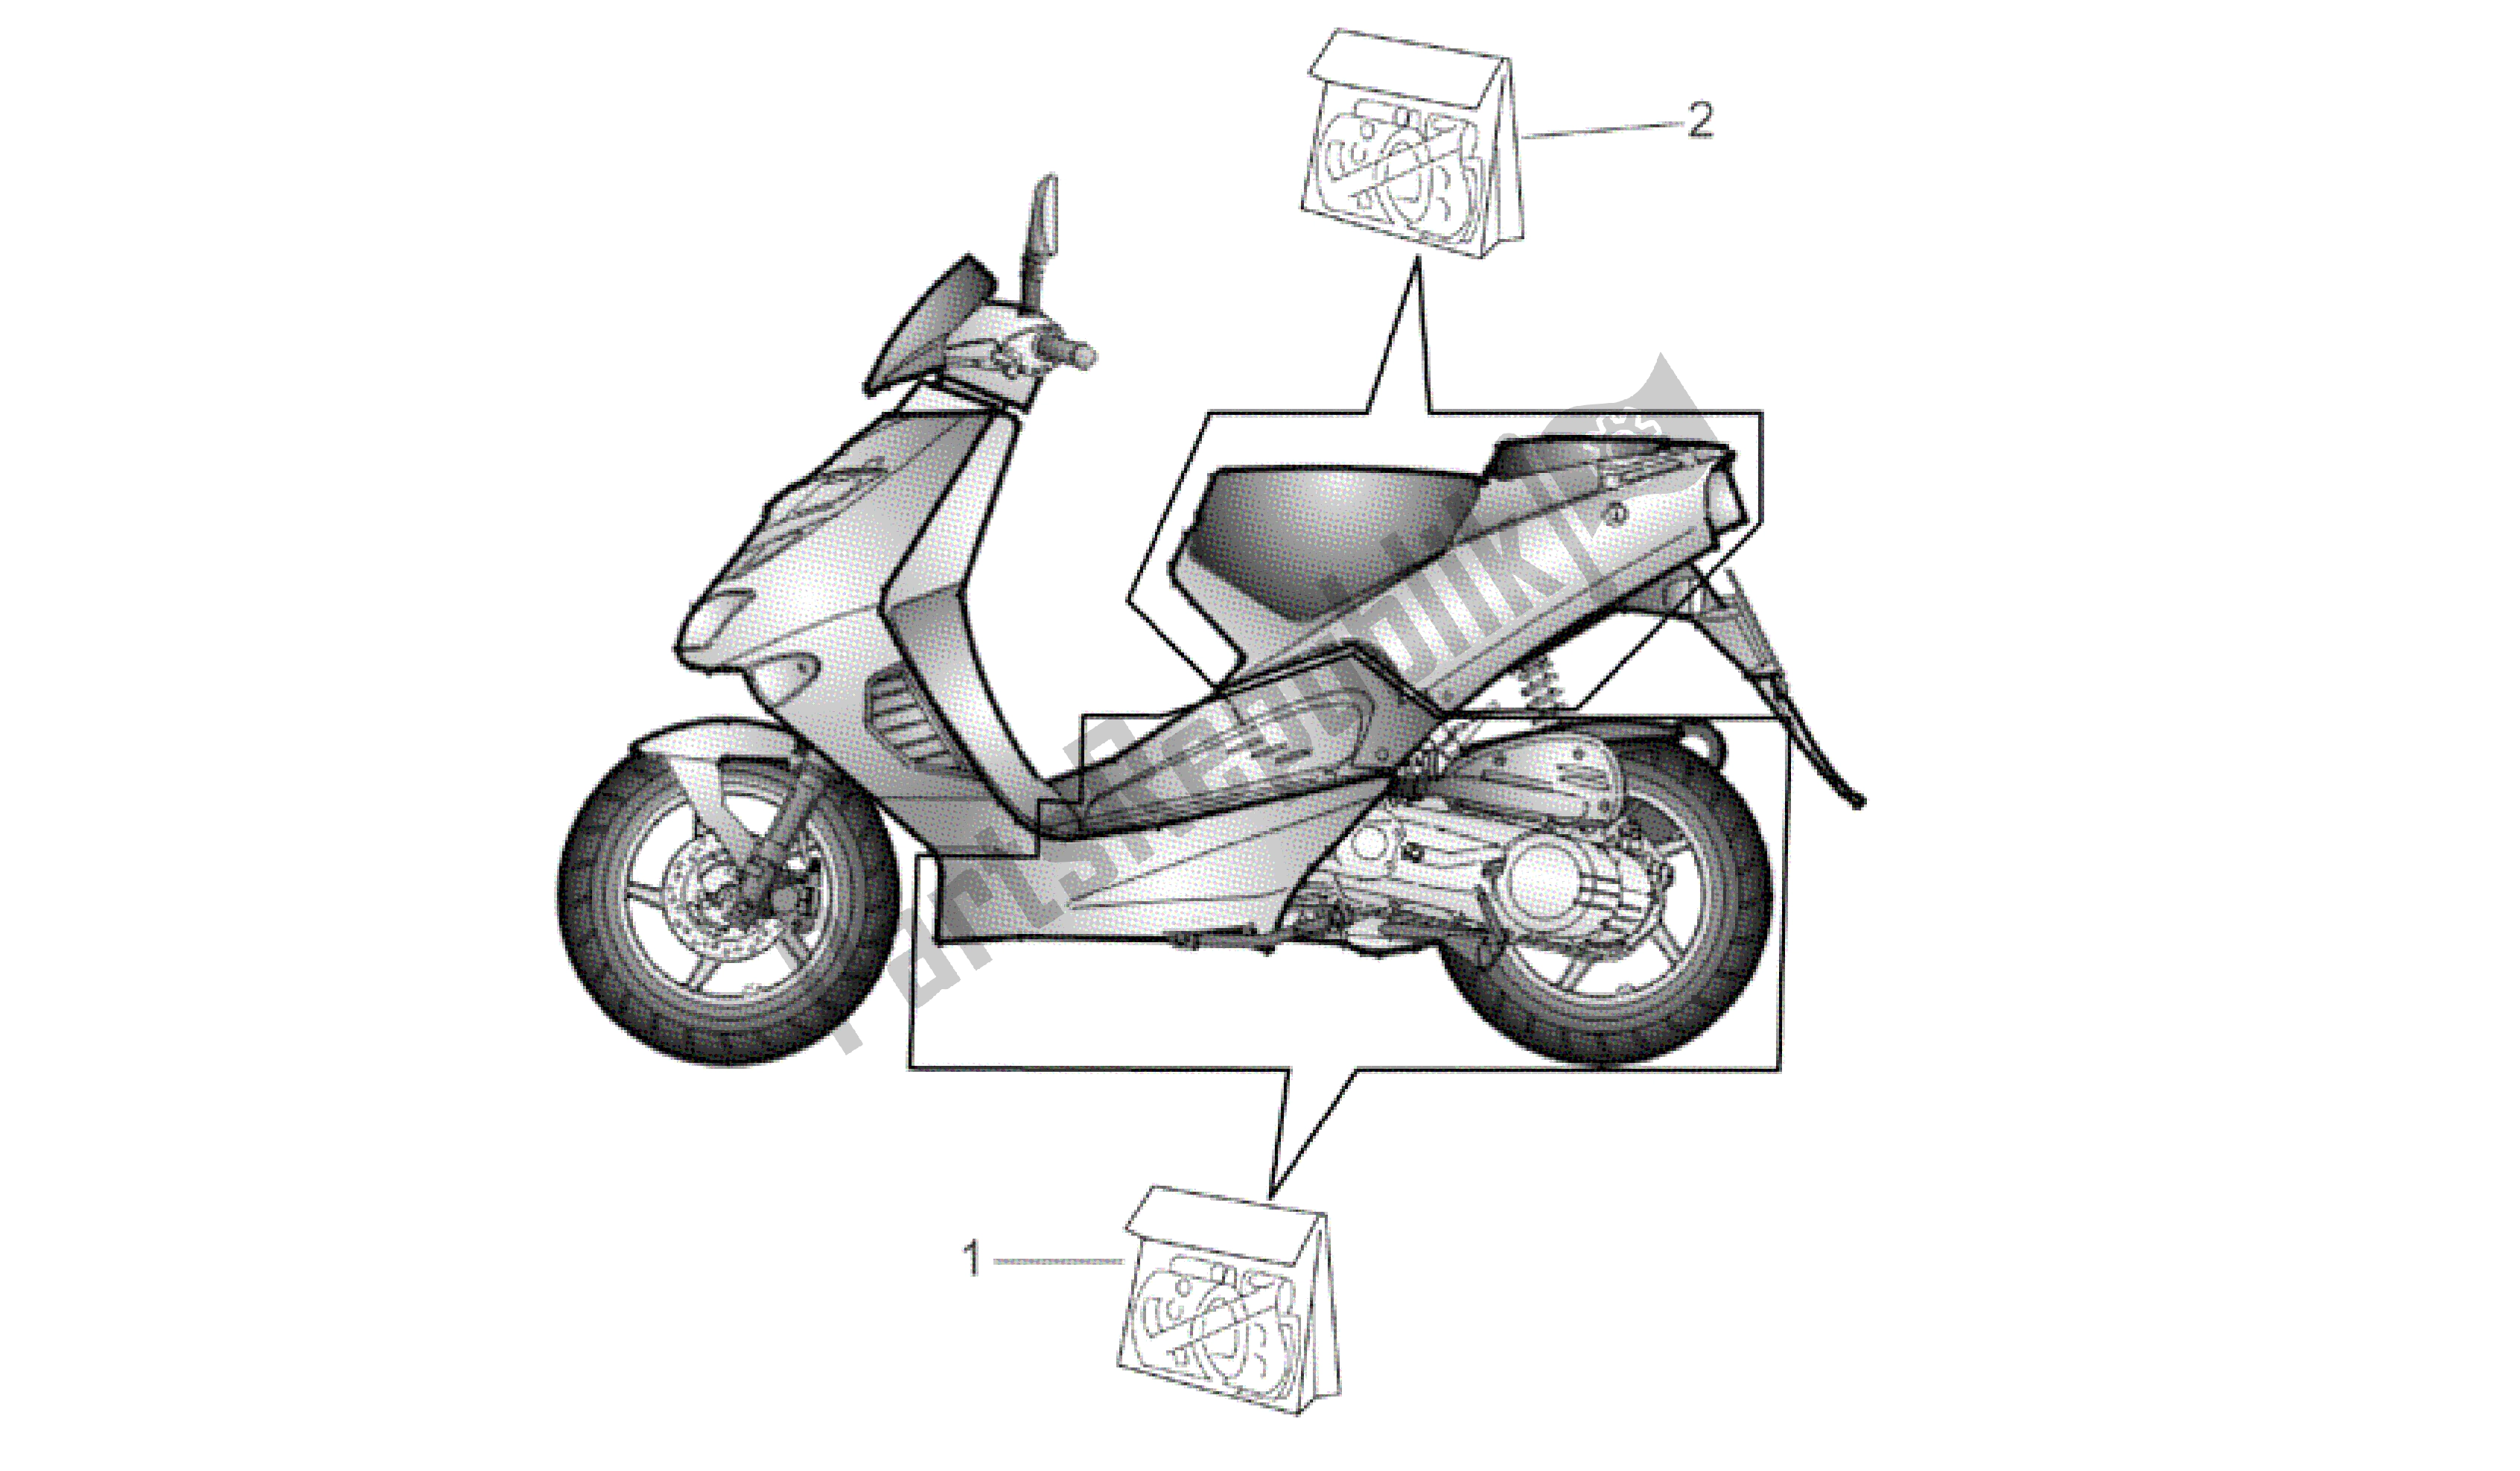 All parts for the Central And Rear Body Decal of the Aprilia SR 50 2000 - 2004